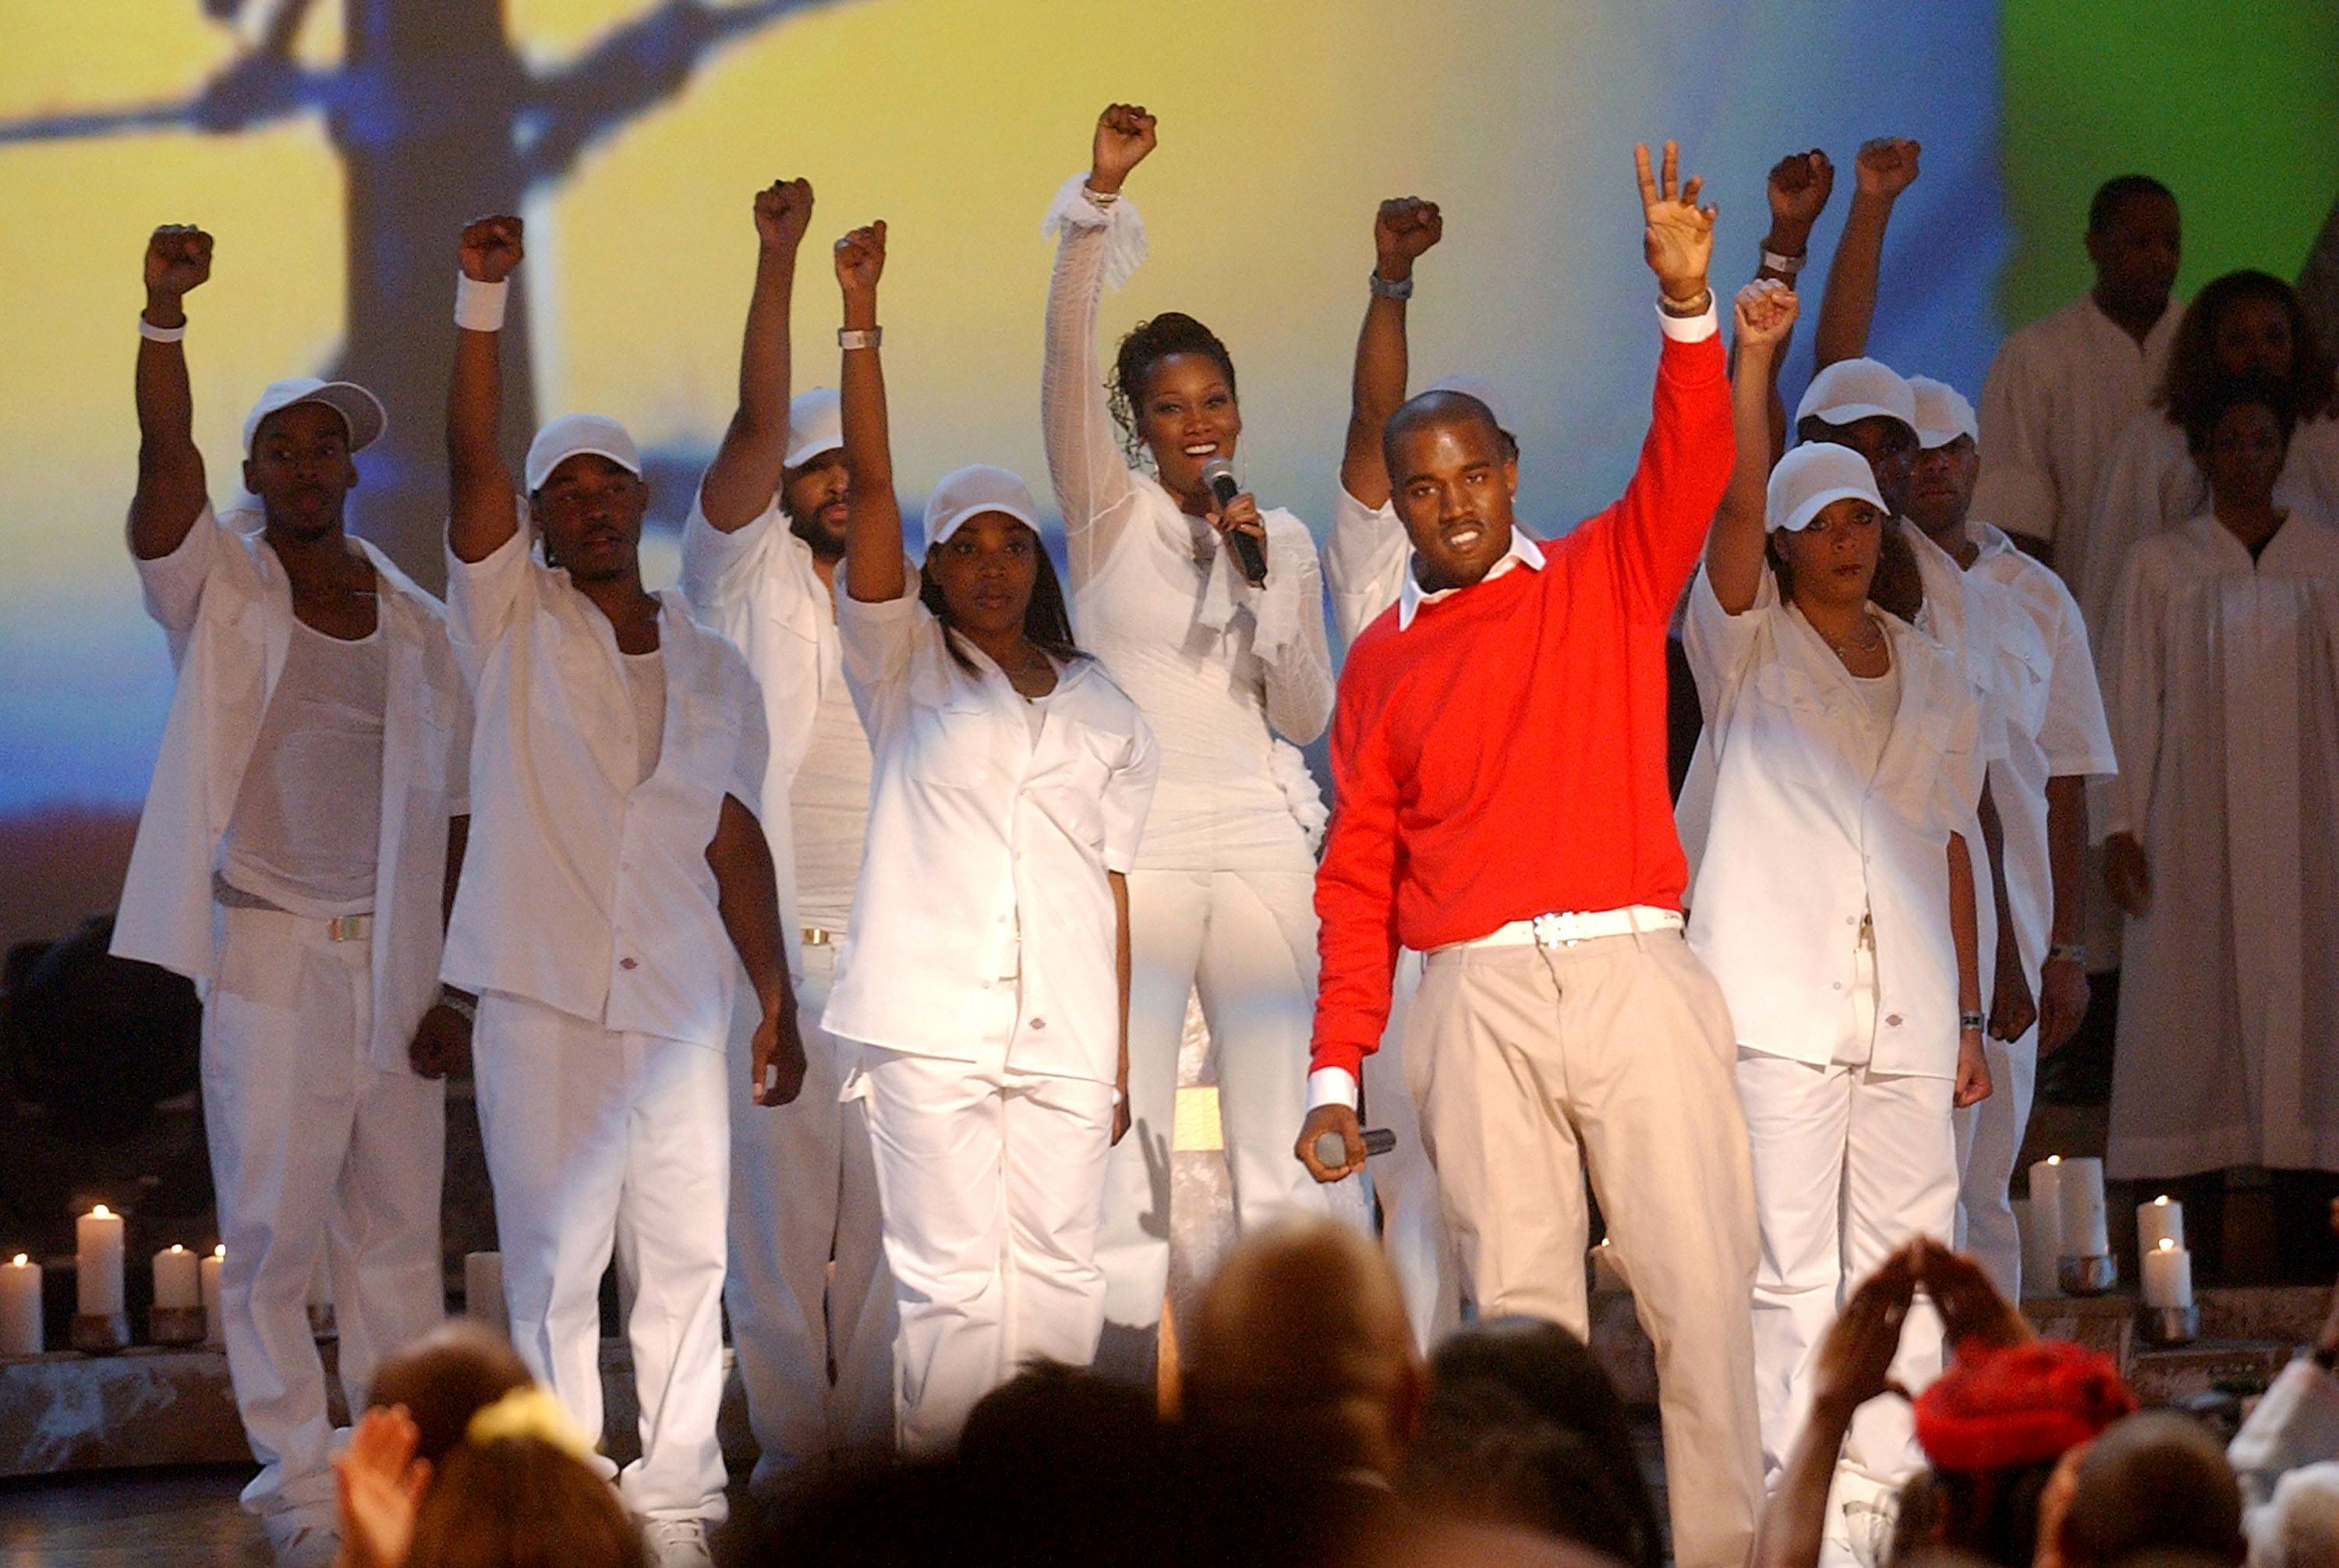 Walking With Jesus - Kanye West had us catching the holy ghost when he brought out Yolanda Adams for his &quot;Jesus Walks&quot; performance at the 2004 BET Awards.&nbsp;(Photo:&nbsp;M. Caulfield/WireImage.com)